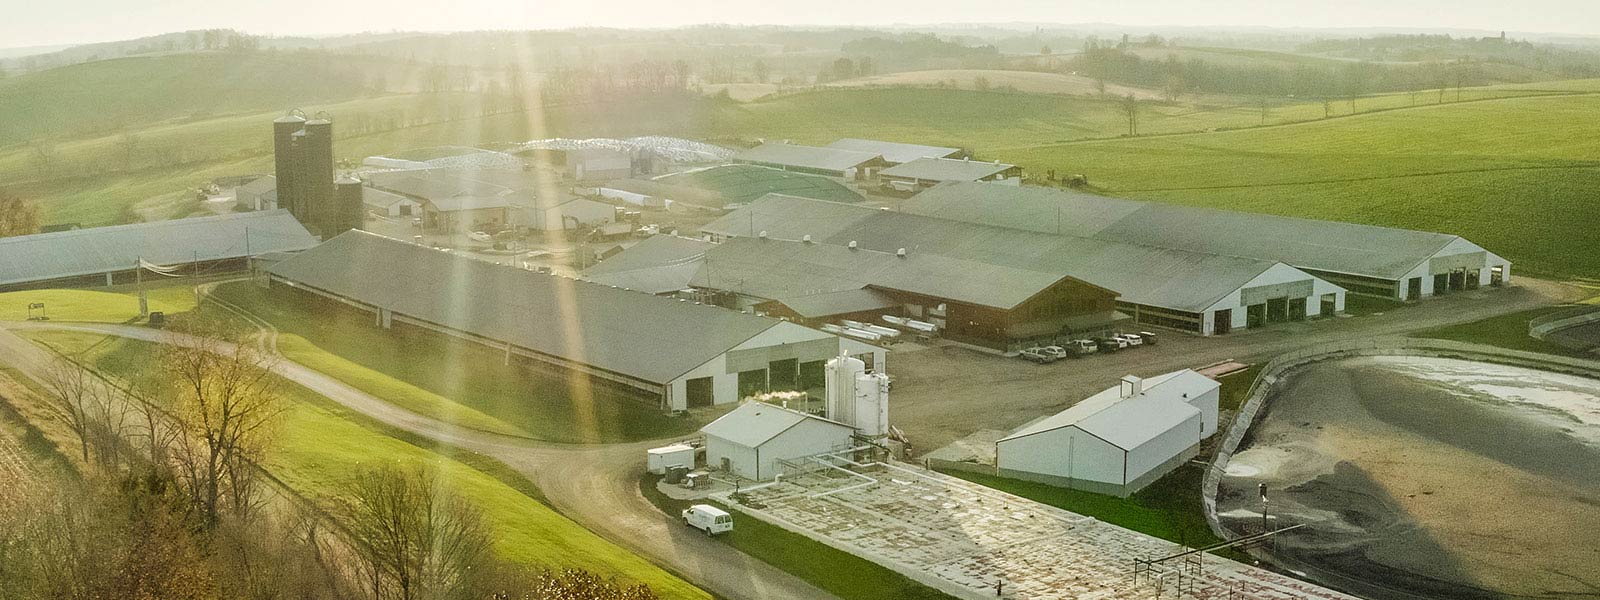 aerial photo of a dairy farm with a two-stage linear vortex anaerobic digester in the foreground